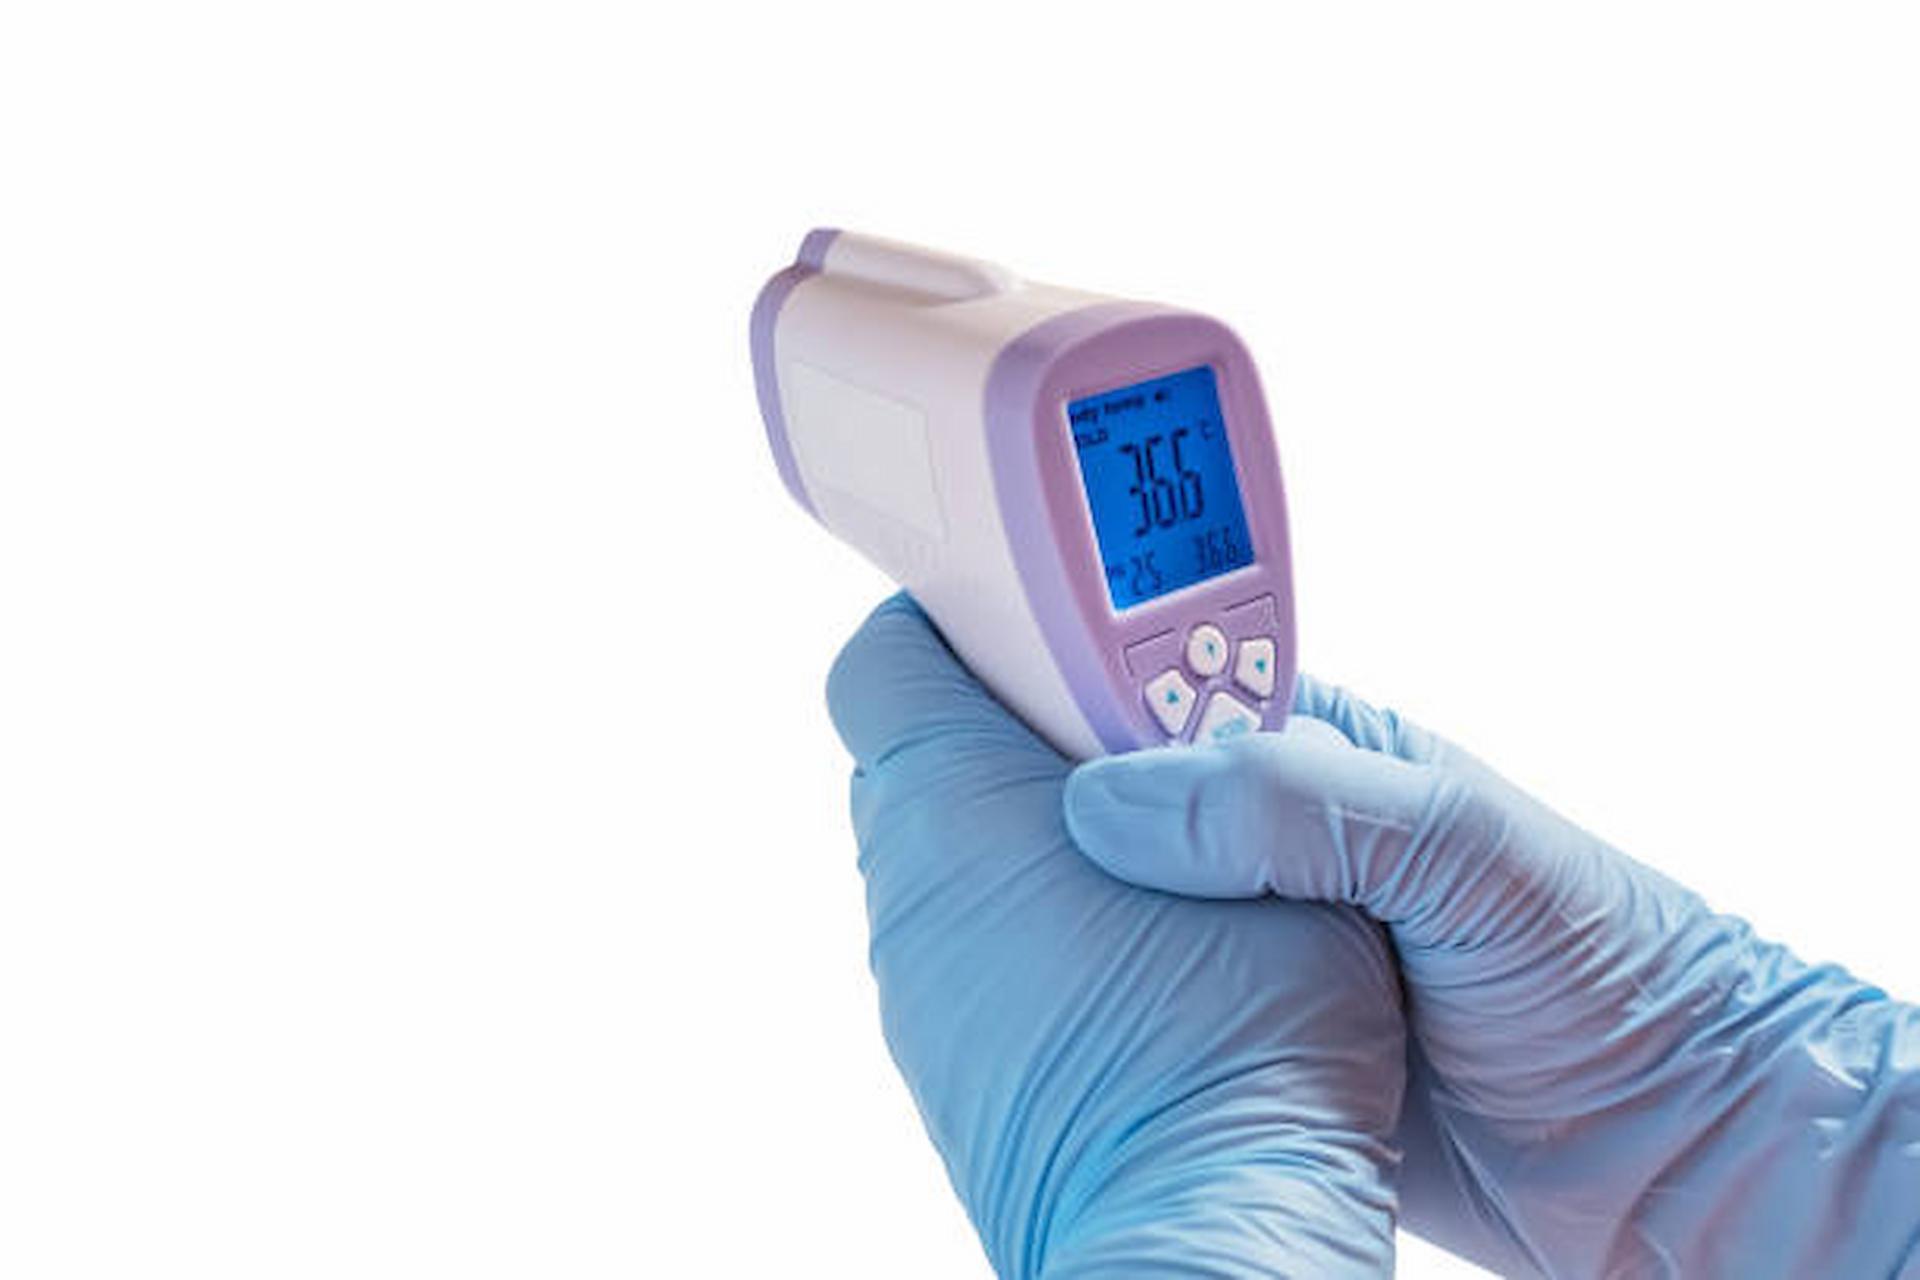 infrared thermometers